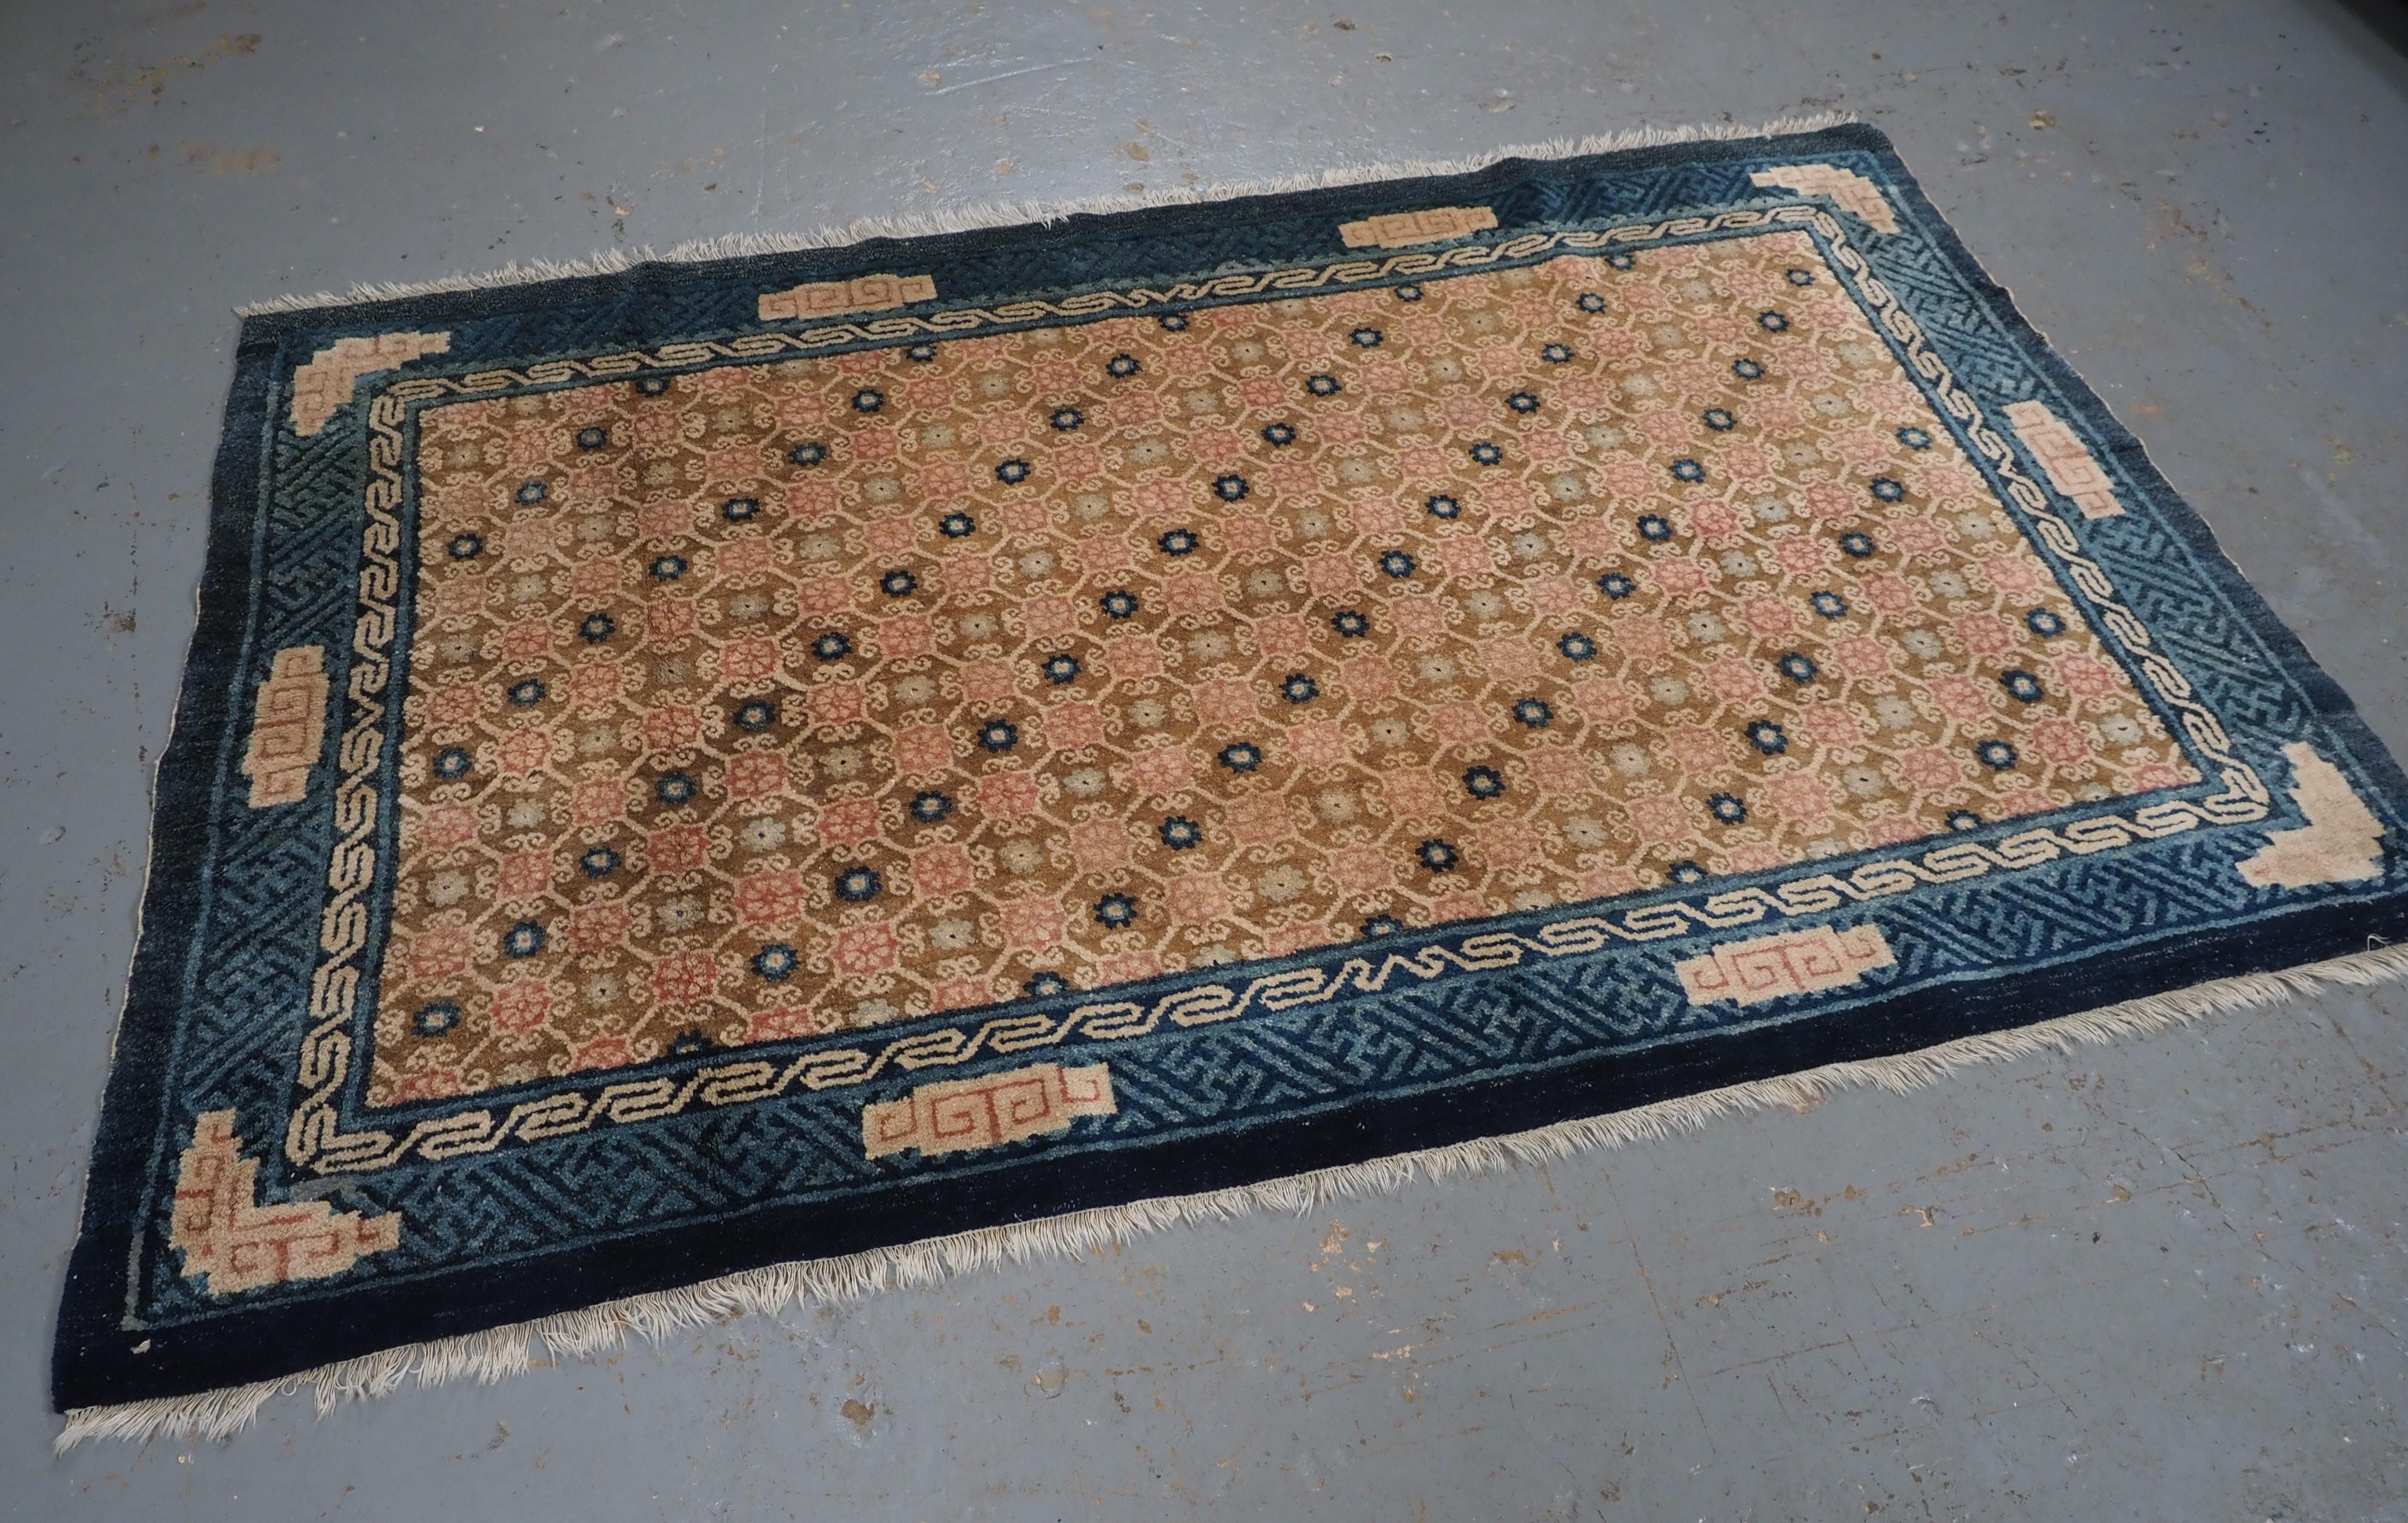 Size: 4ft 2in x 6ft 6in (126 x 198cm).

Antique Chinese Peking rug with lattice design.

Circa 1900.

A very good example of a lattice design with floral blossom in pinks and blue on a soft beige ground. The rug is framed by a blue border with